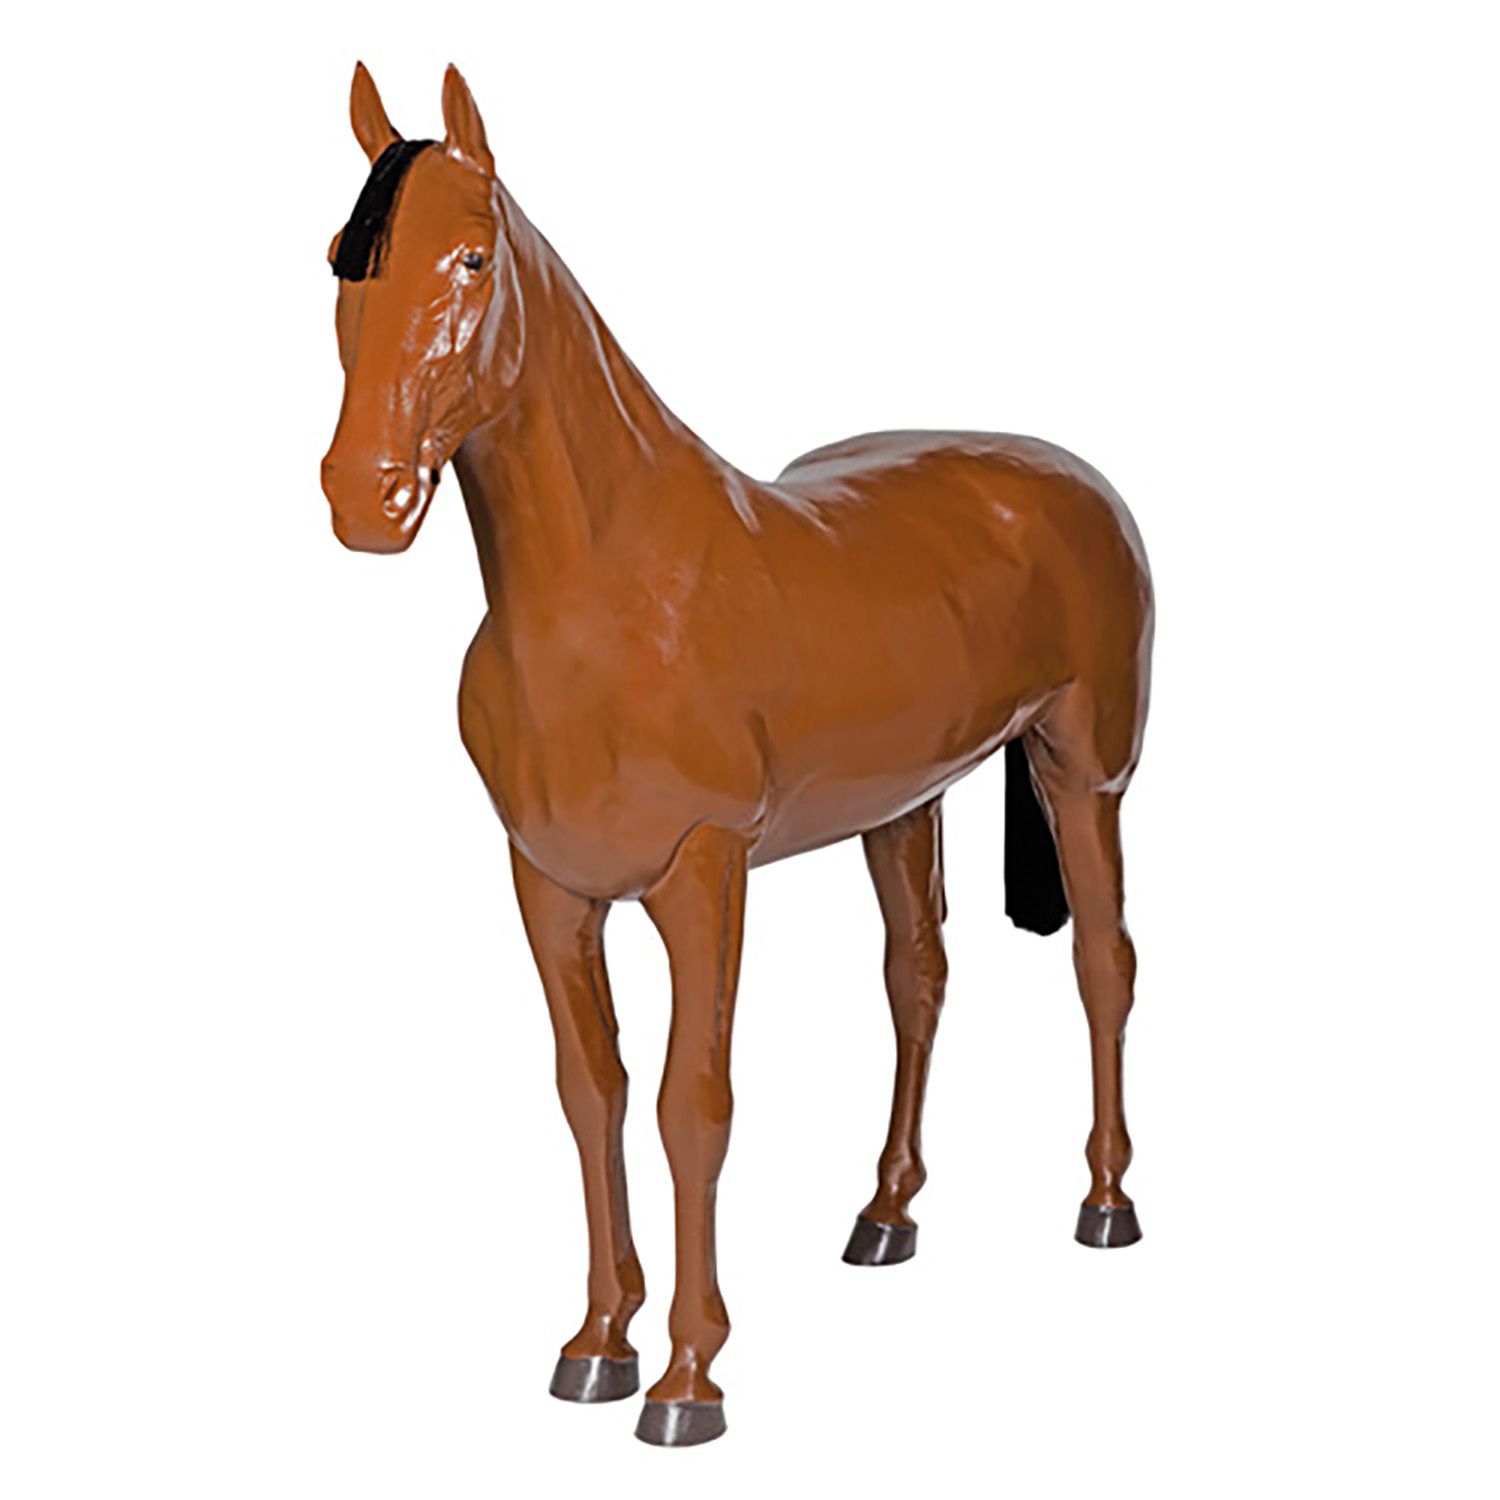 STUBBS DISPLAY HORSE LIFE-SIZE S112 BROWN